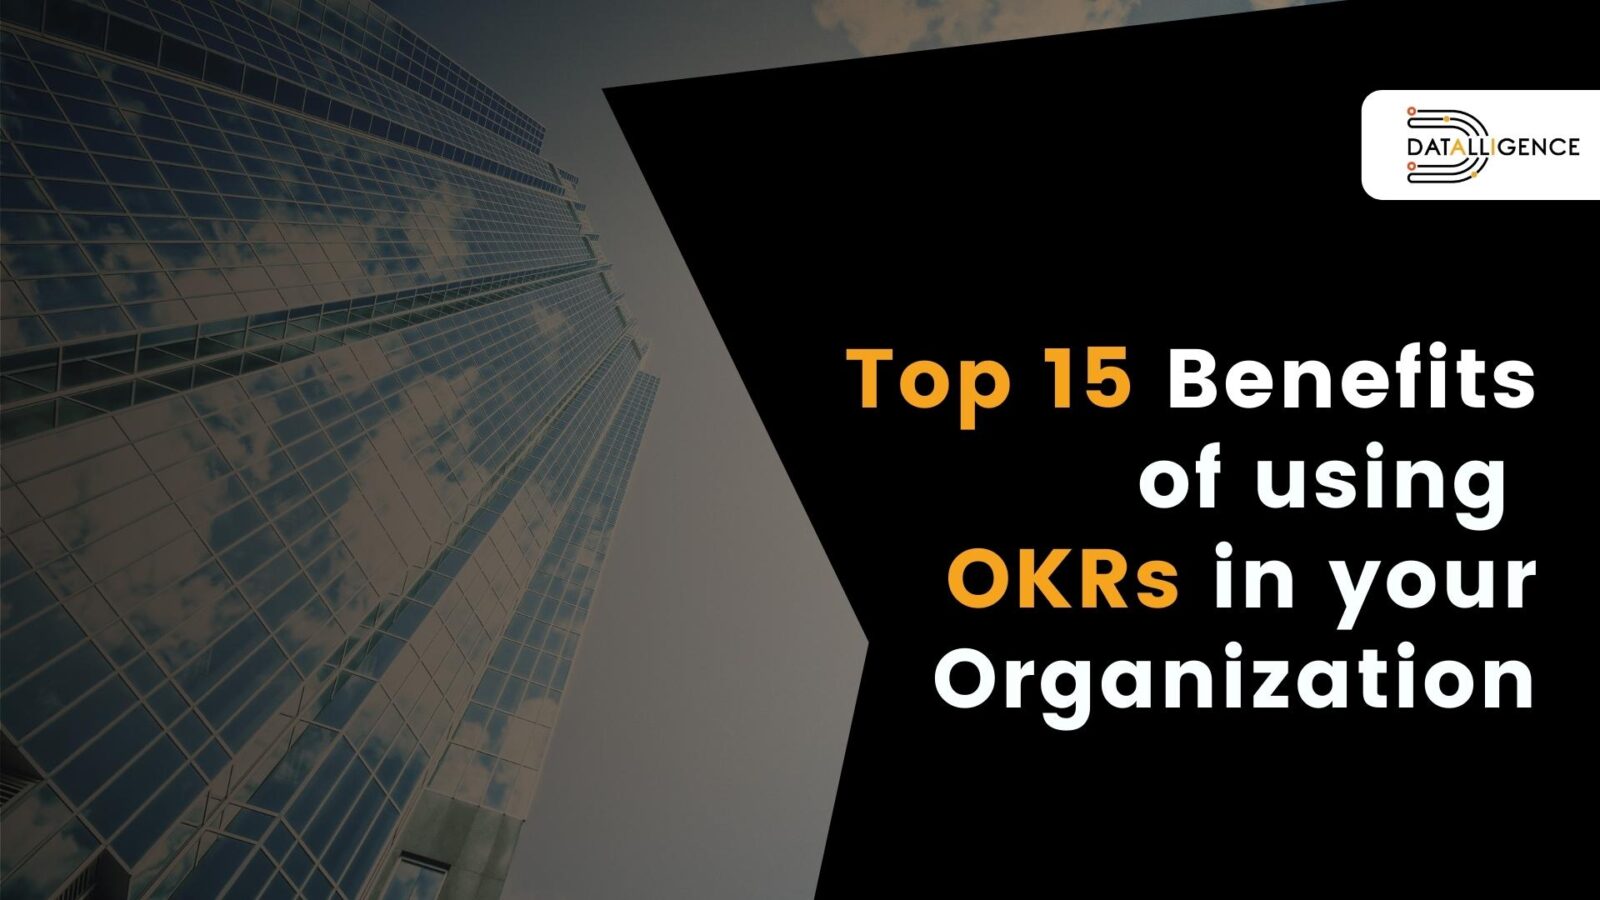 Top 15 Benefits of using OKR in your organization